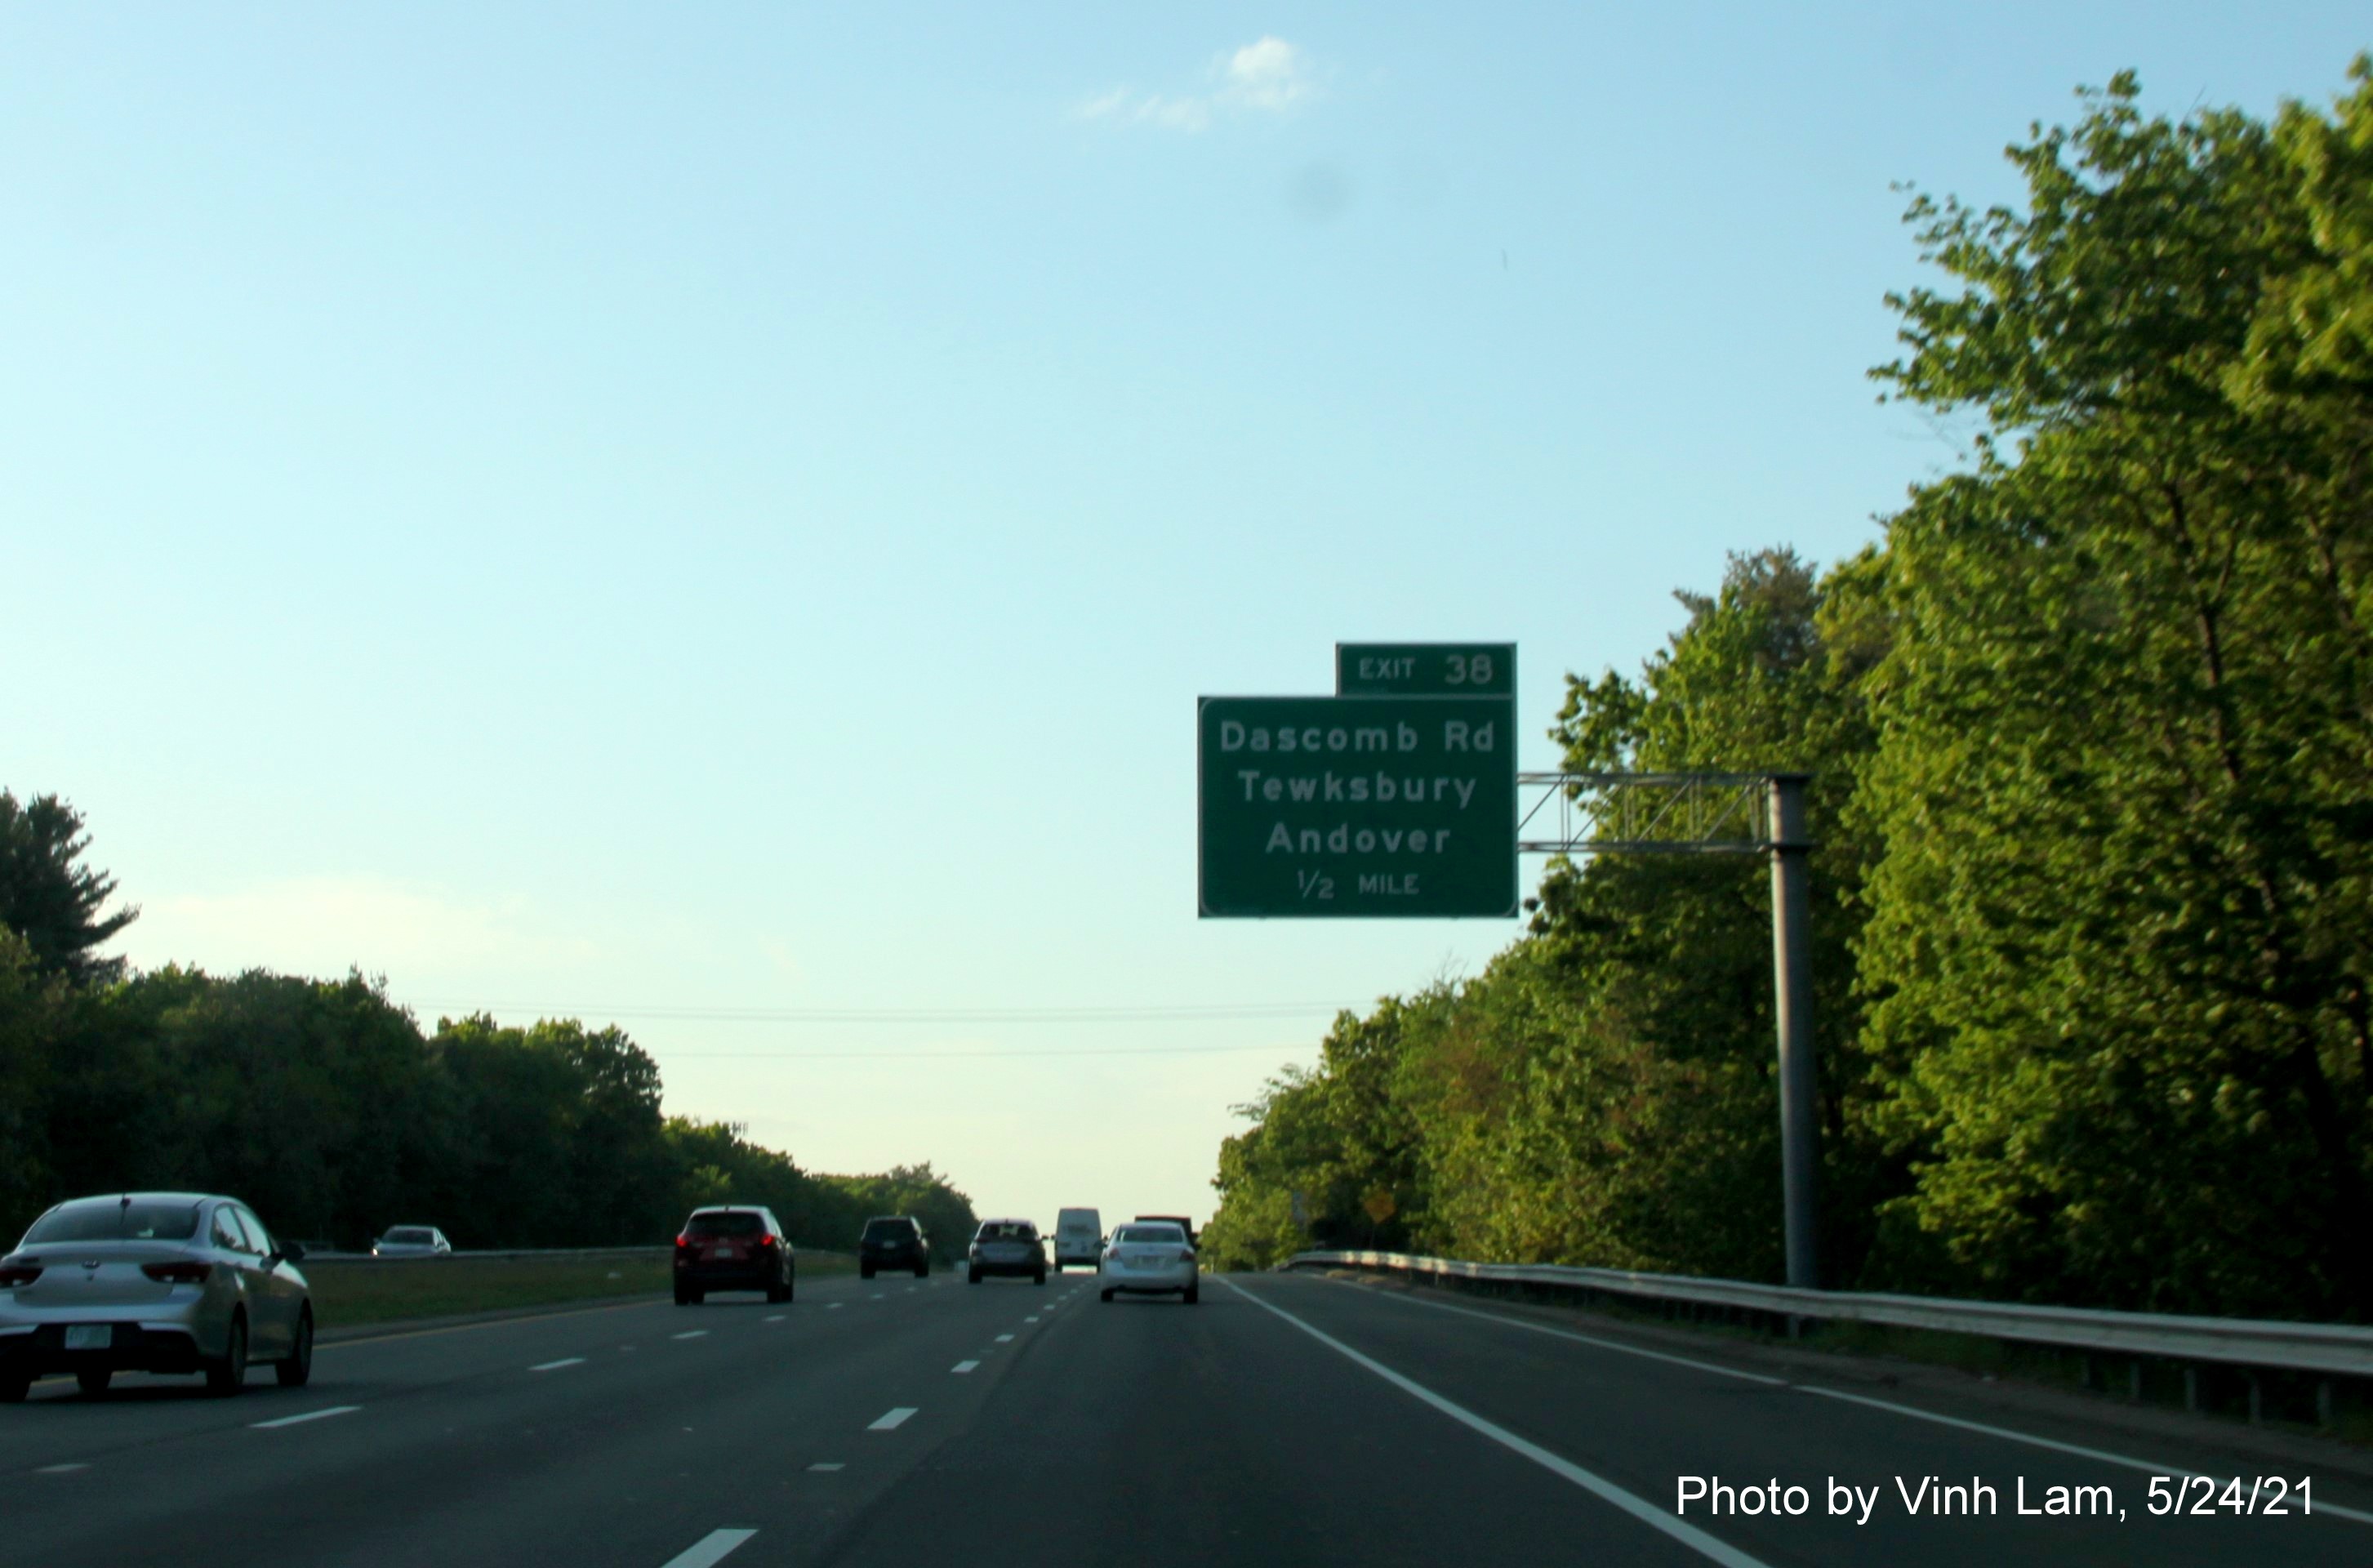 Image of 1/2 mile advance overhead sign for Dascomb Road exit on I-93 North in Andover, by Vinh Lam, May 2021 